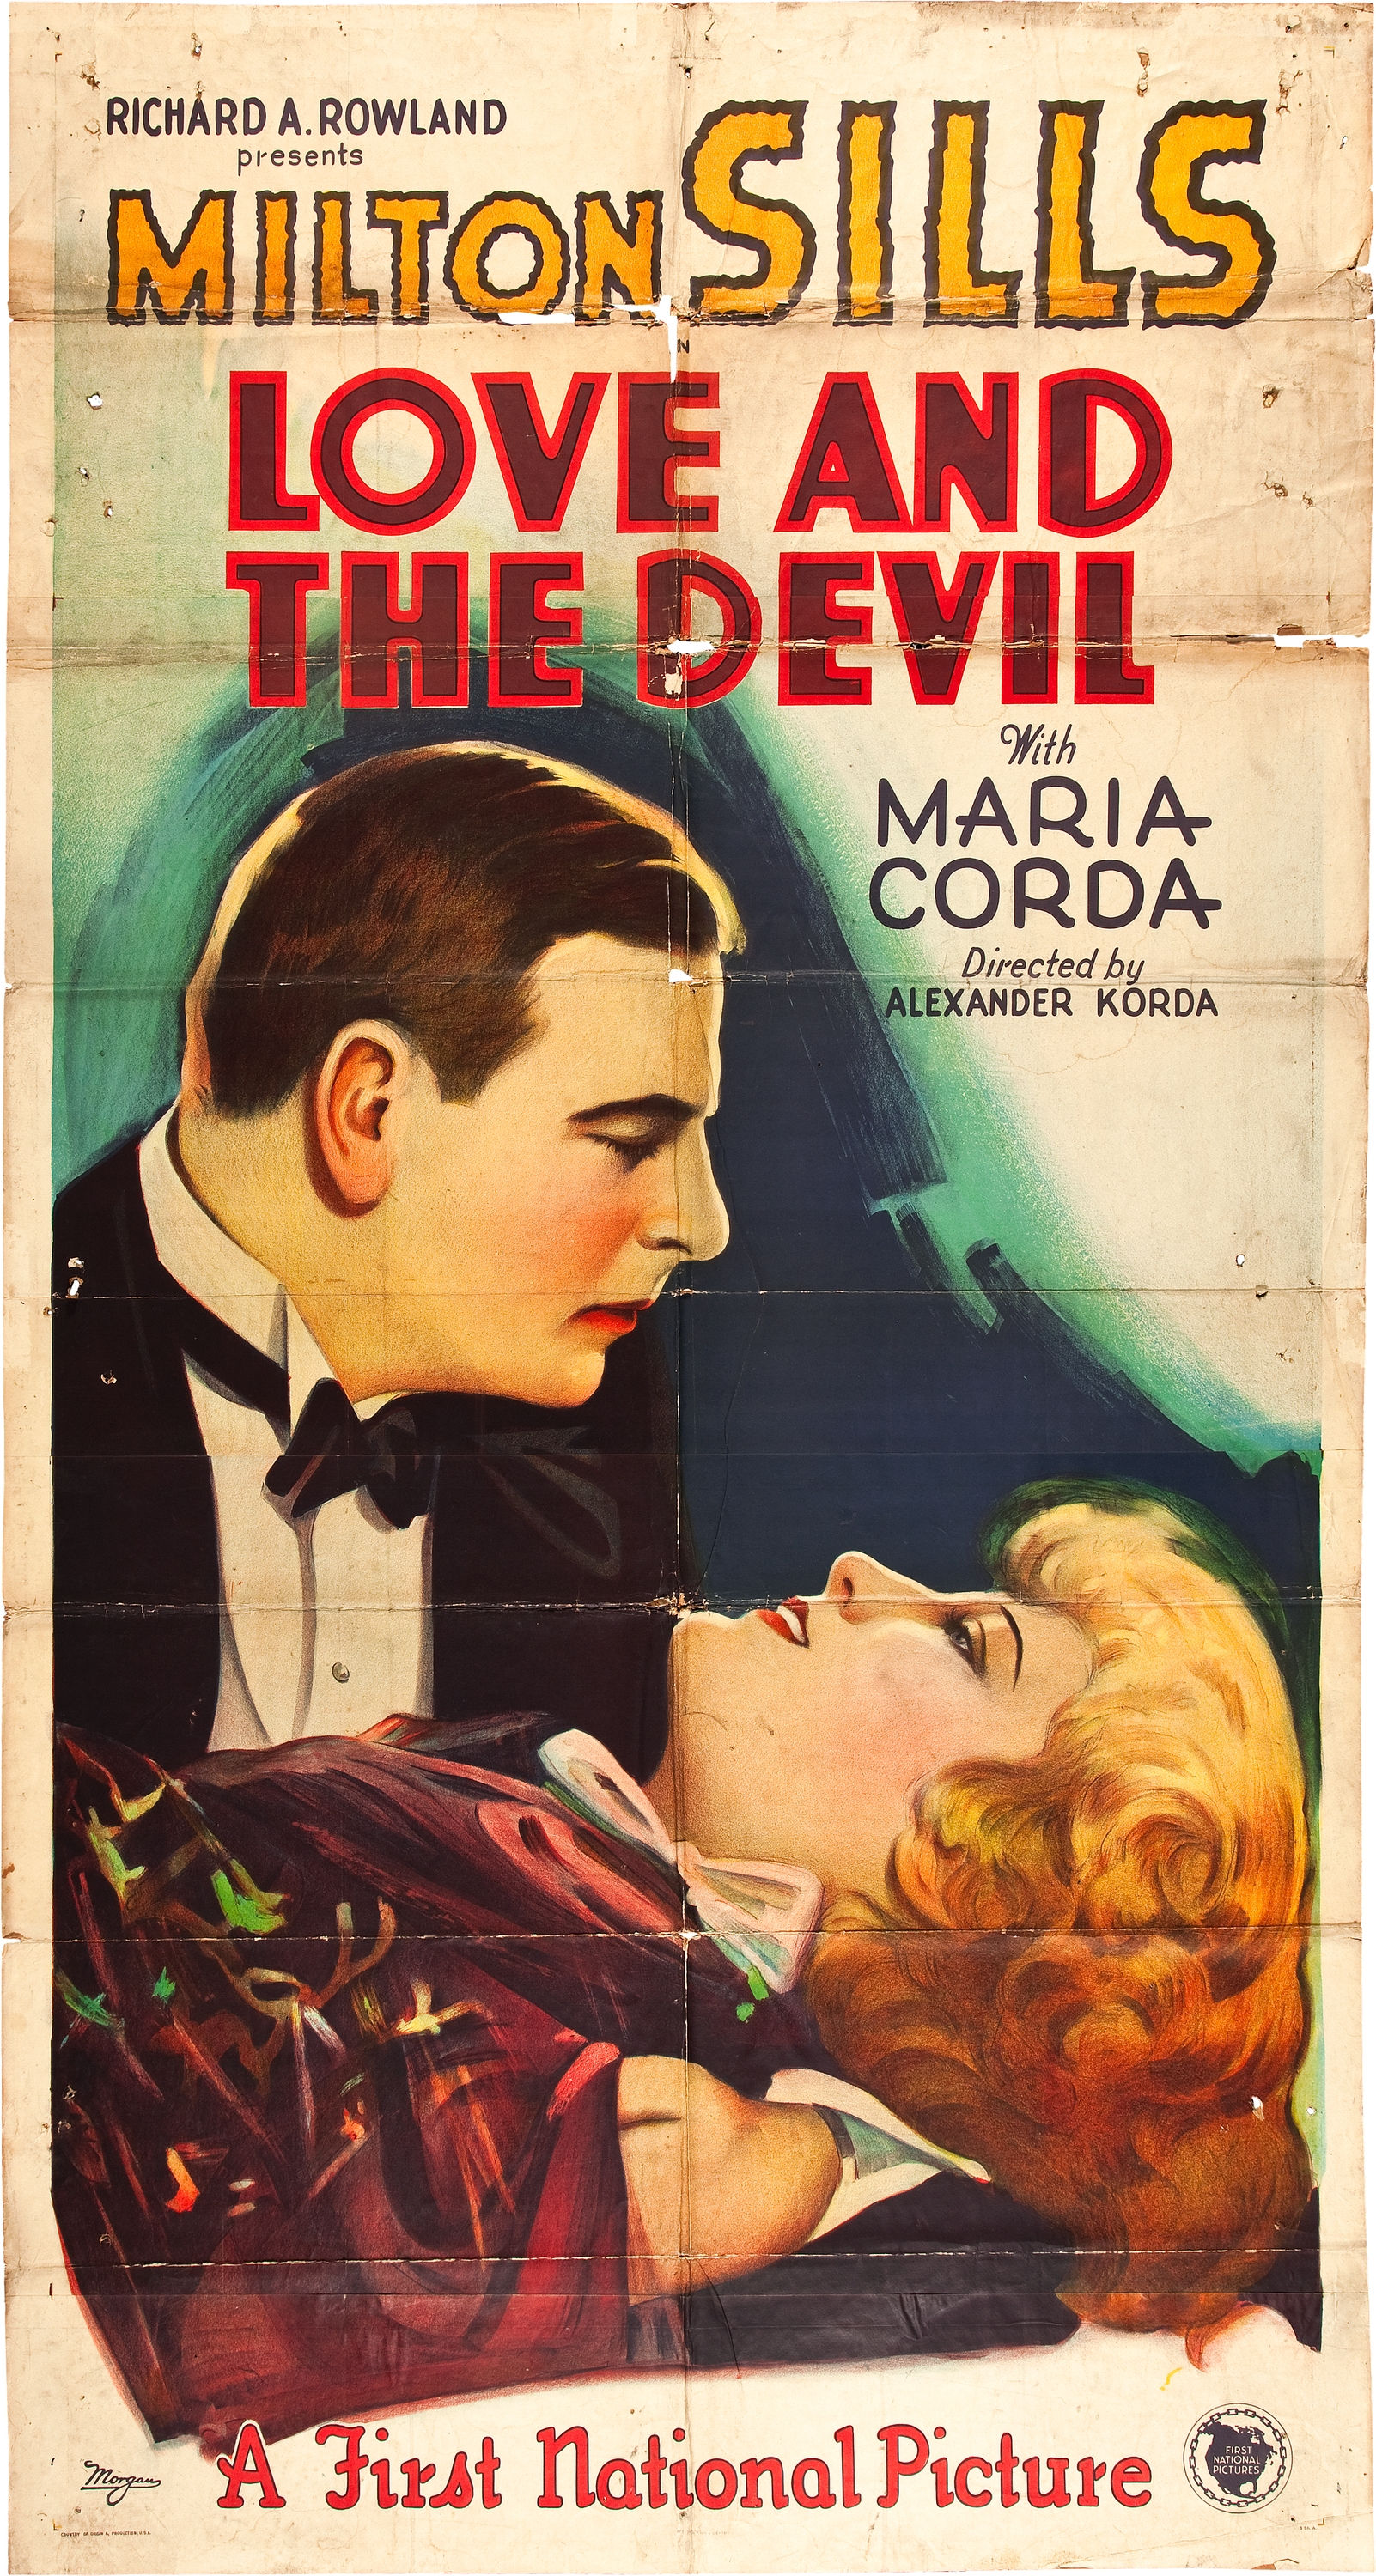 Love and the Devil